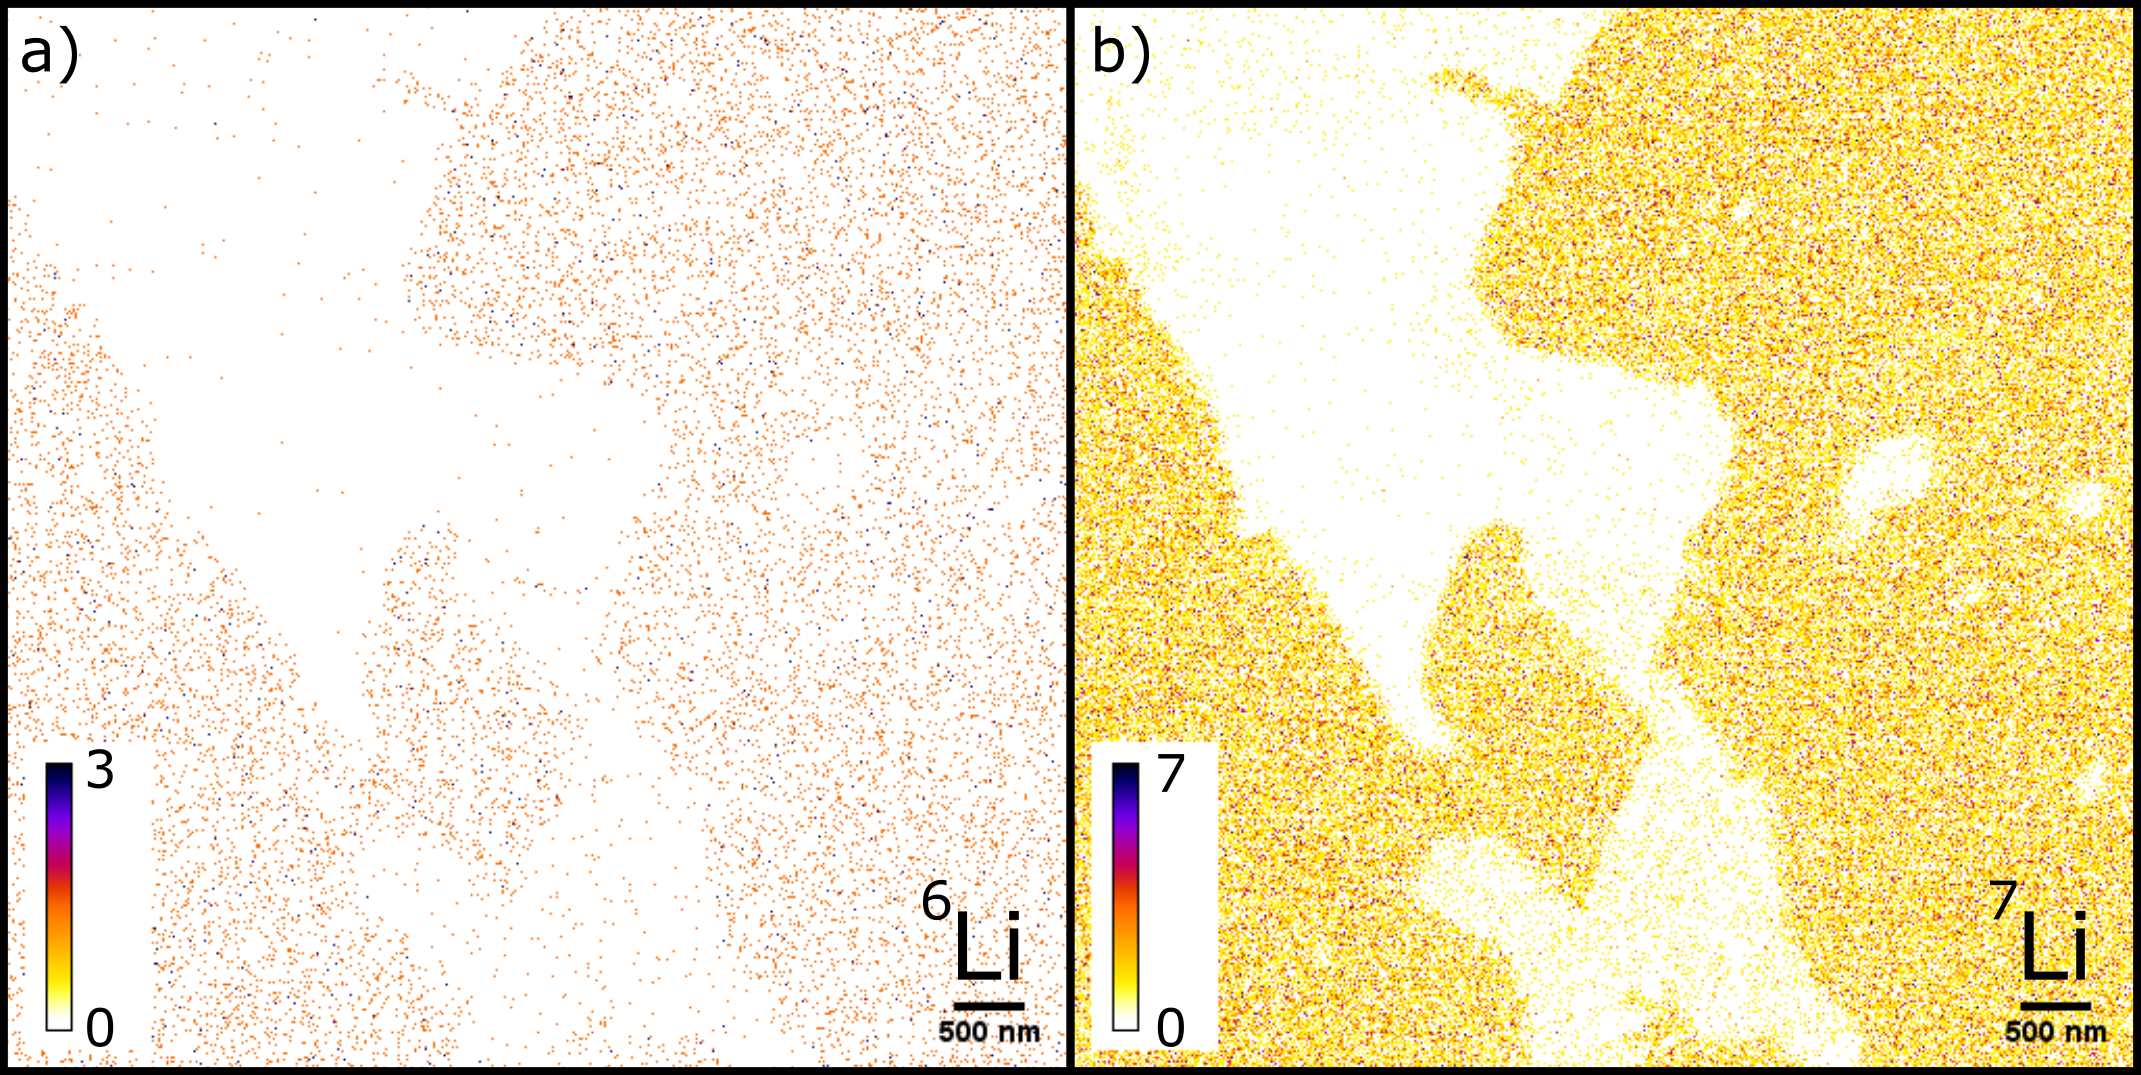 Images showing the nanonscale chemical maps of lithium in a sample of spodumene - a lithium bearing mineral. The maps allow isolated patches and veins of concentrated lithium to be picked out